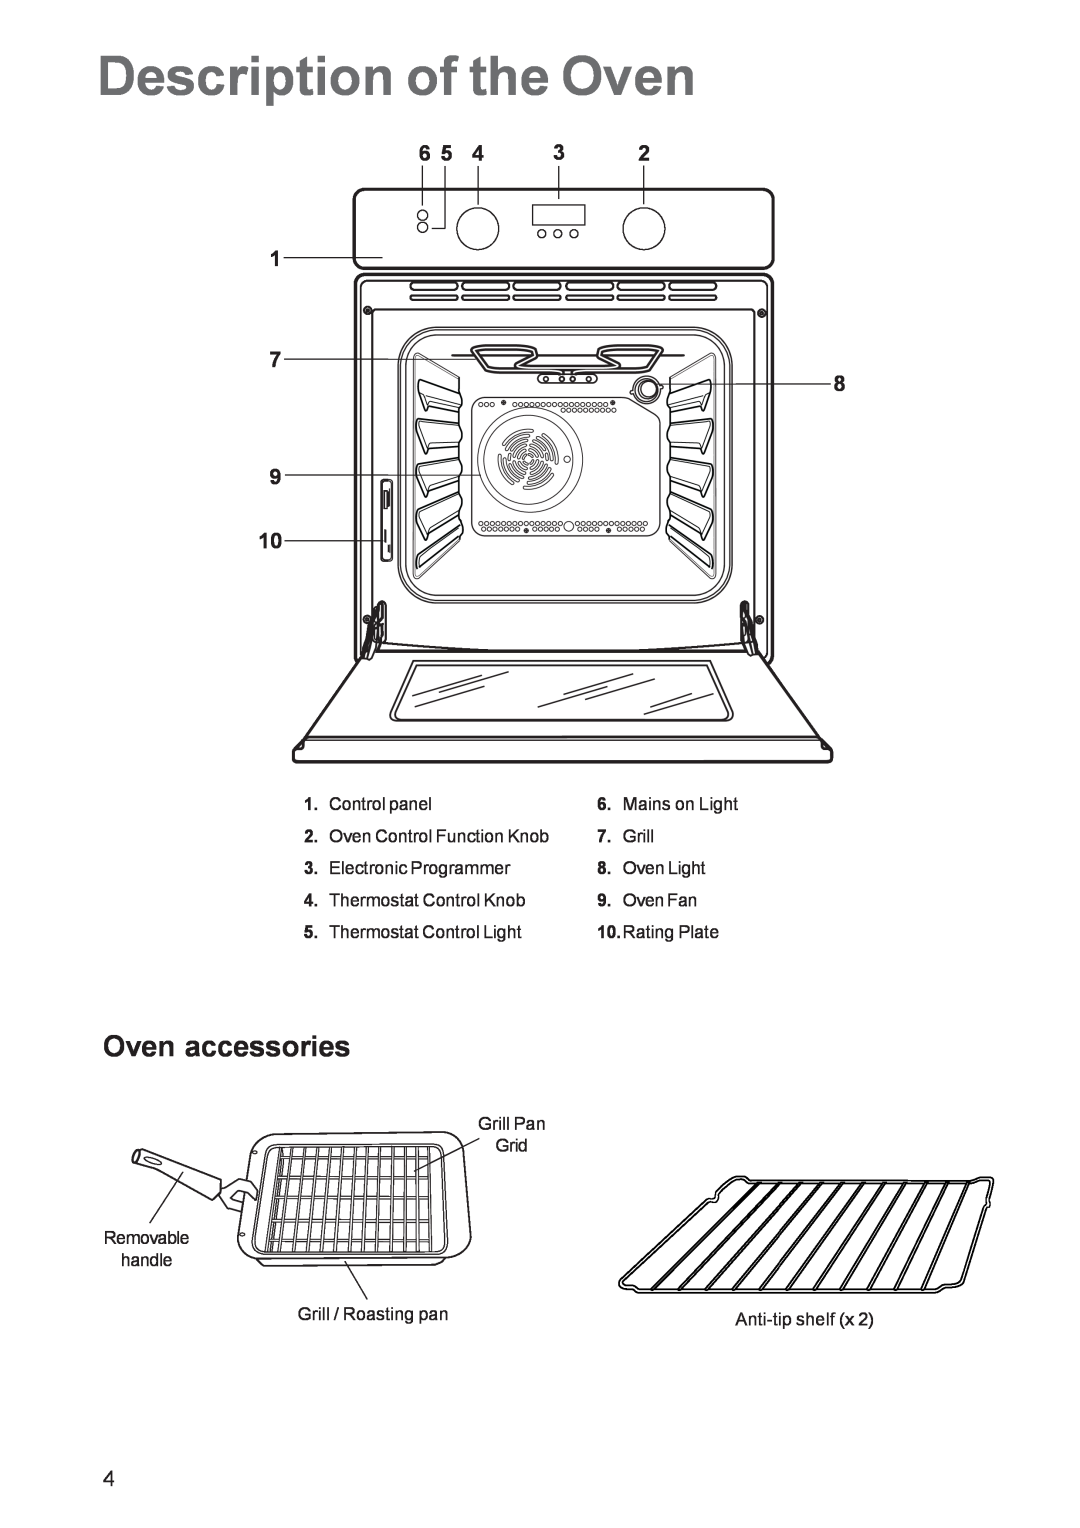 Zanussi ZBF 361 manual Description of the Oven, Oven accessories, Control panel, Mains on Light, Oven Control Function Knob 